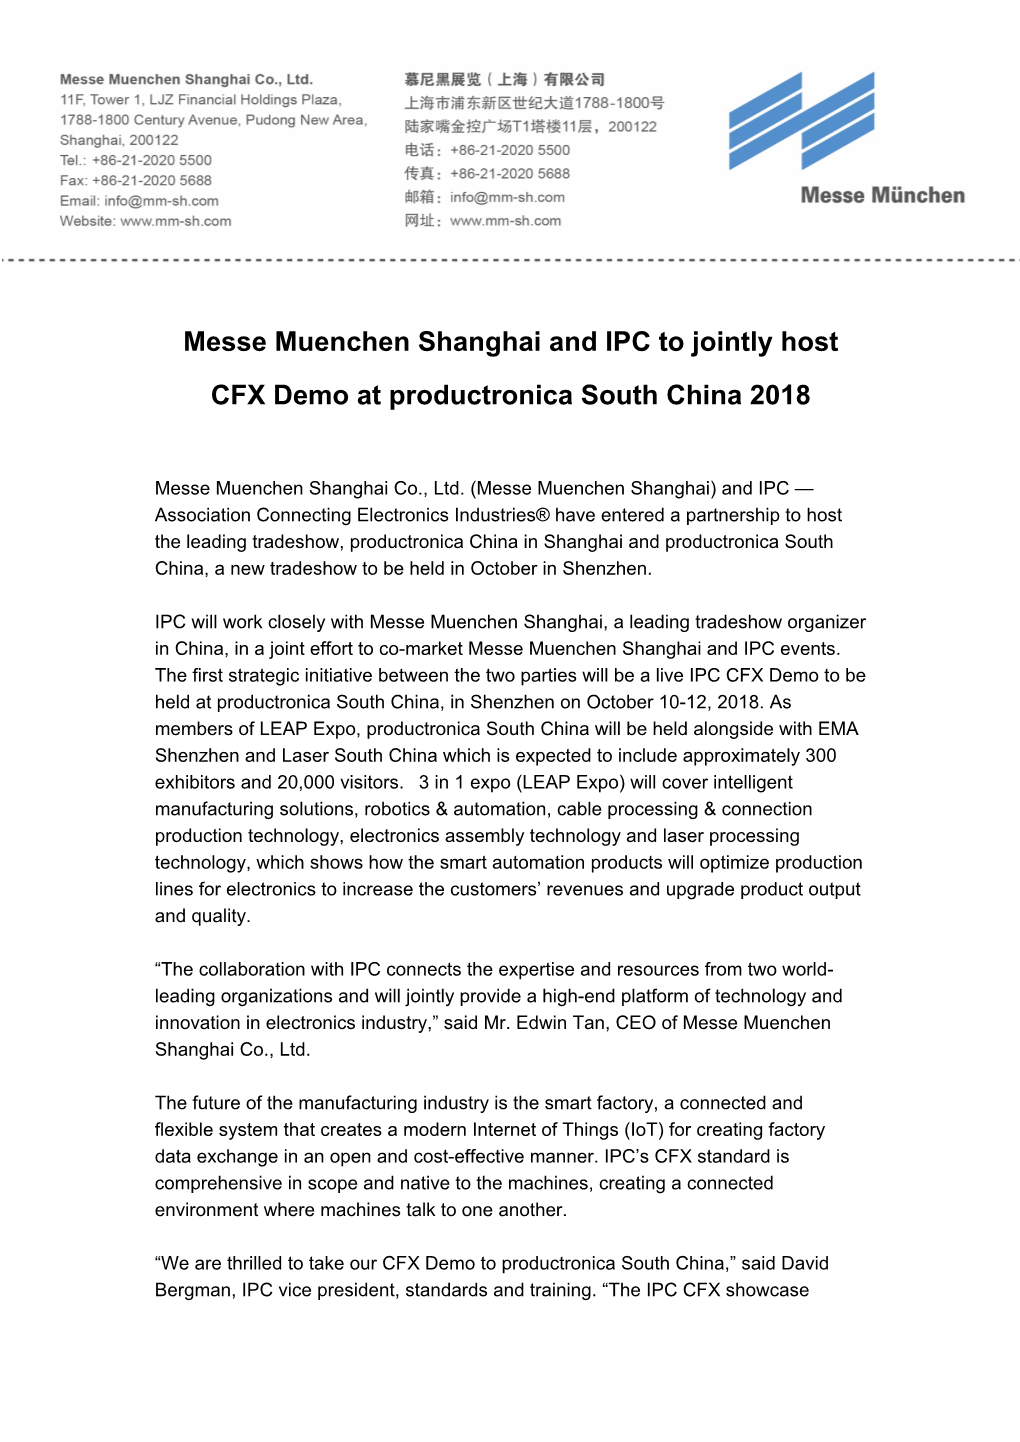 Messe Muenchen Shanghai and IPC to Jointly Host CFX Demo at Productronica South China 2018